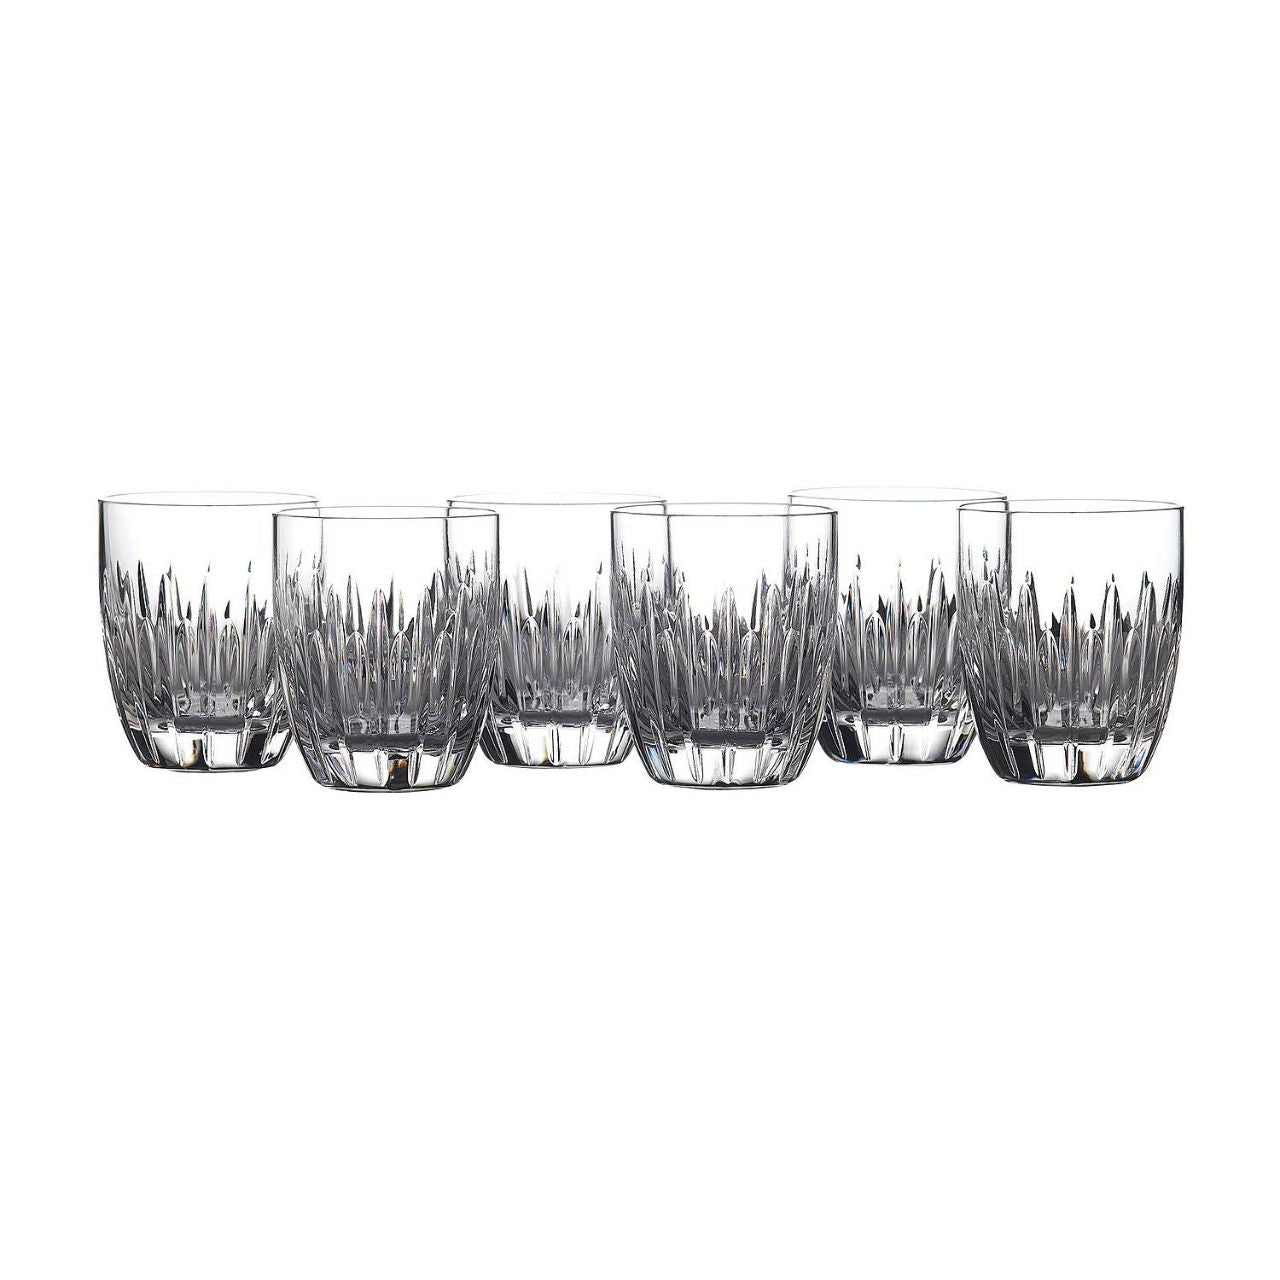 Waterford Crystal Ardan Mara Tumbler Set of 6  Waterford Ardan offers the beauty of simplicity with the Mara pattern. Mara is the Irish meaning for sea and is inspired by the wild Atlantic Ocean with long and short deep vertical cuts. The Ardan Mara Tumbler set is perfect for every day use.